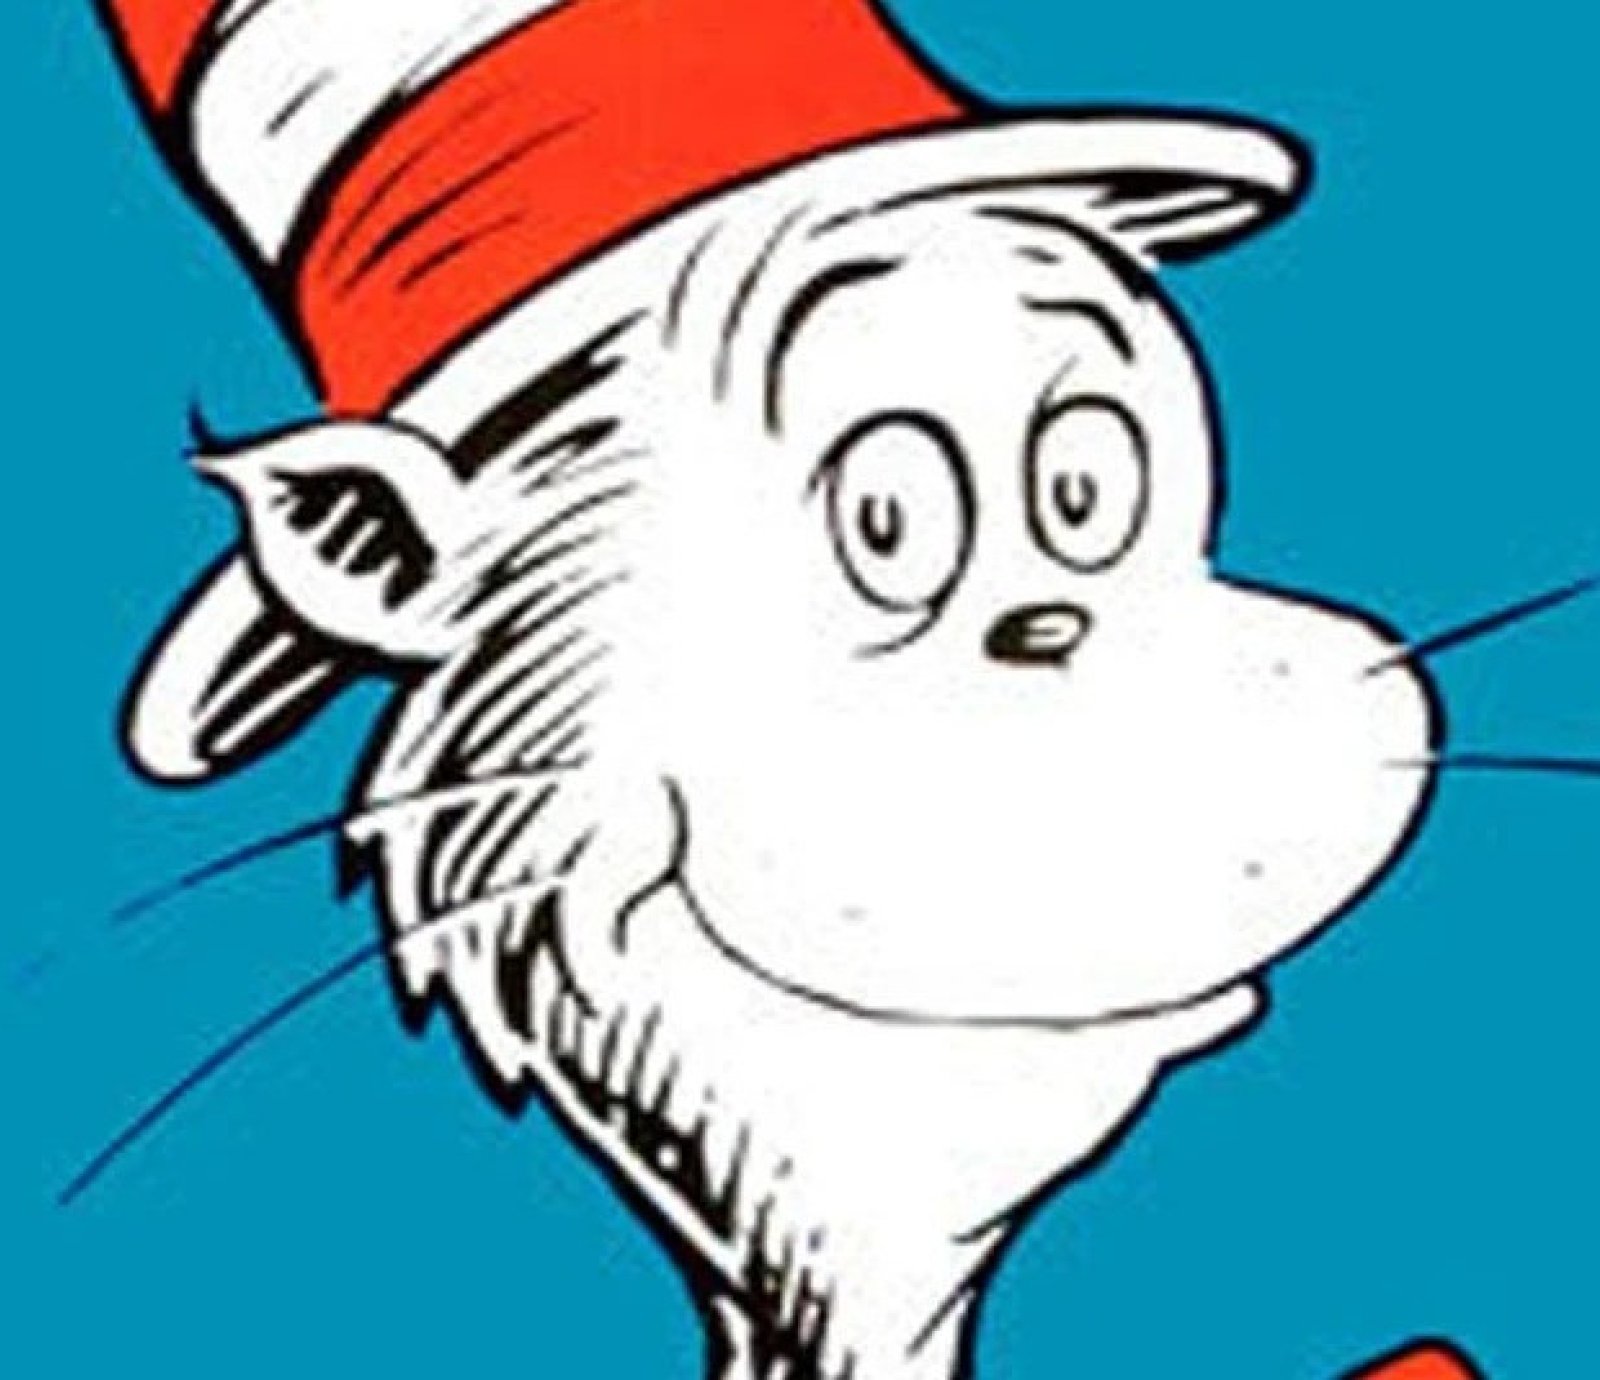 Dr Seuss’s The Cat In The Hat